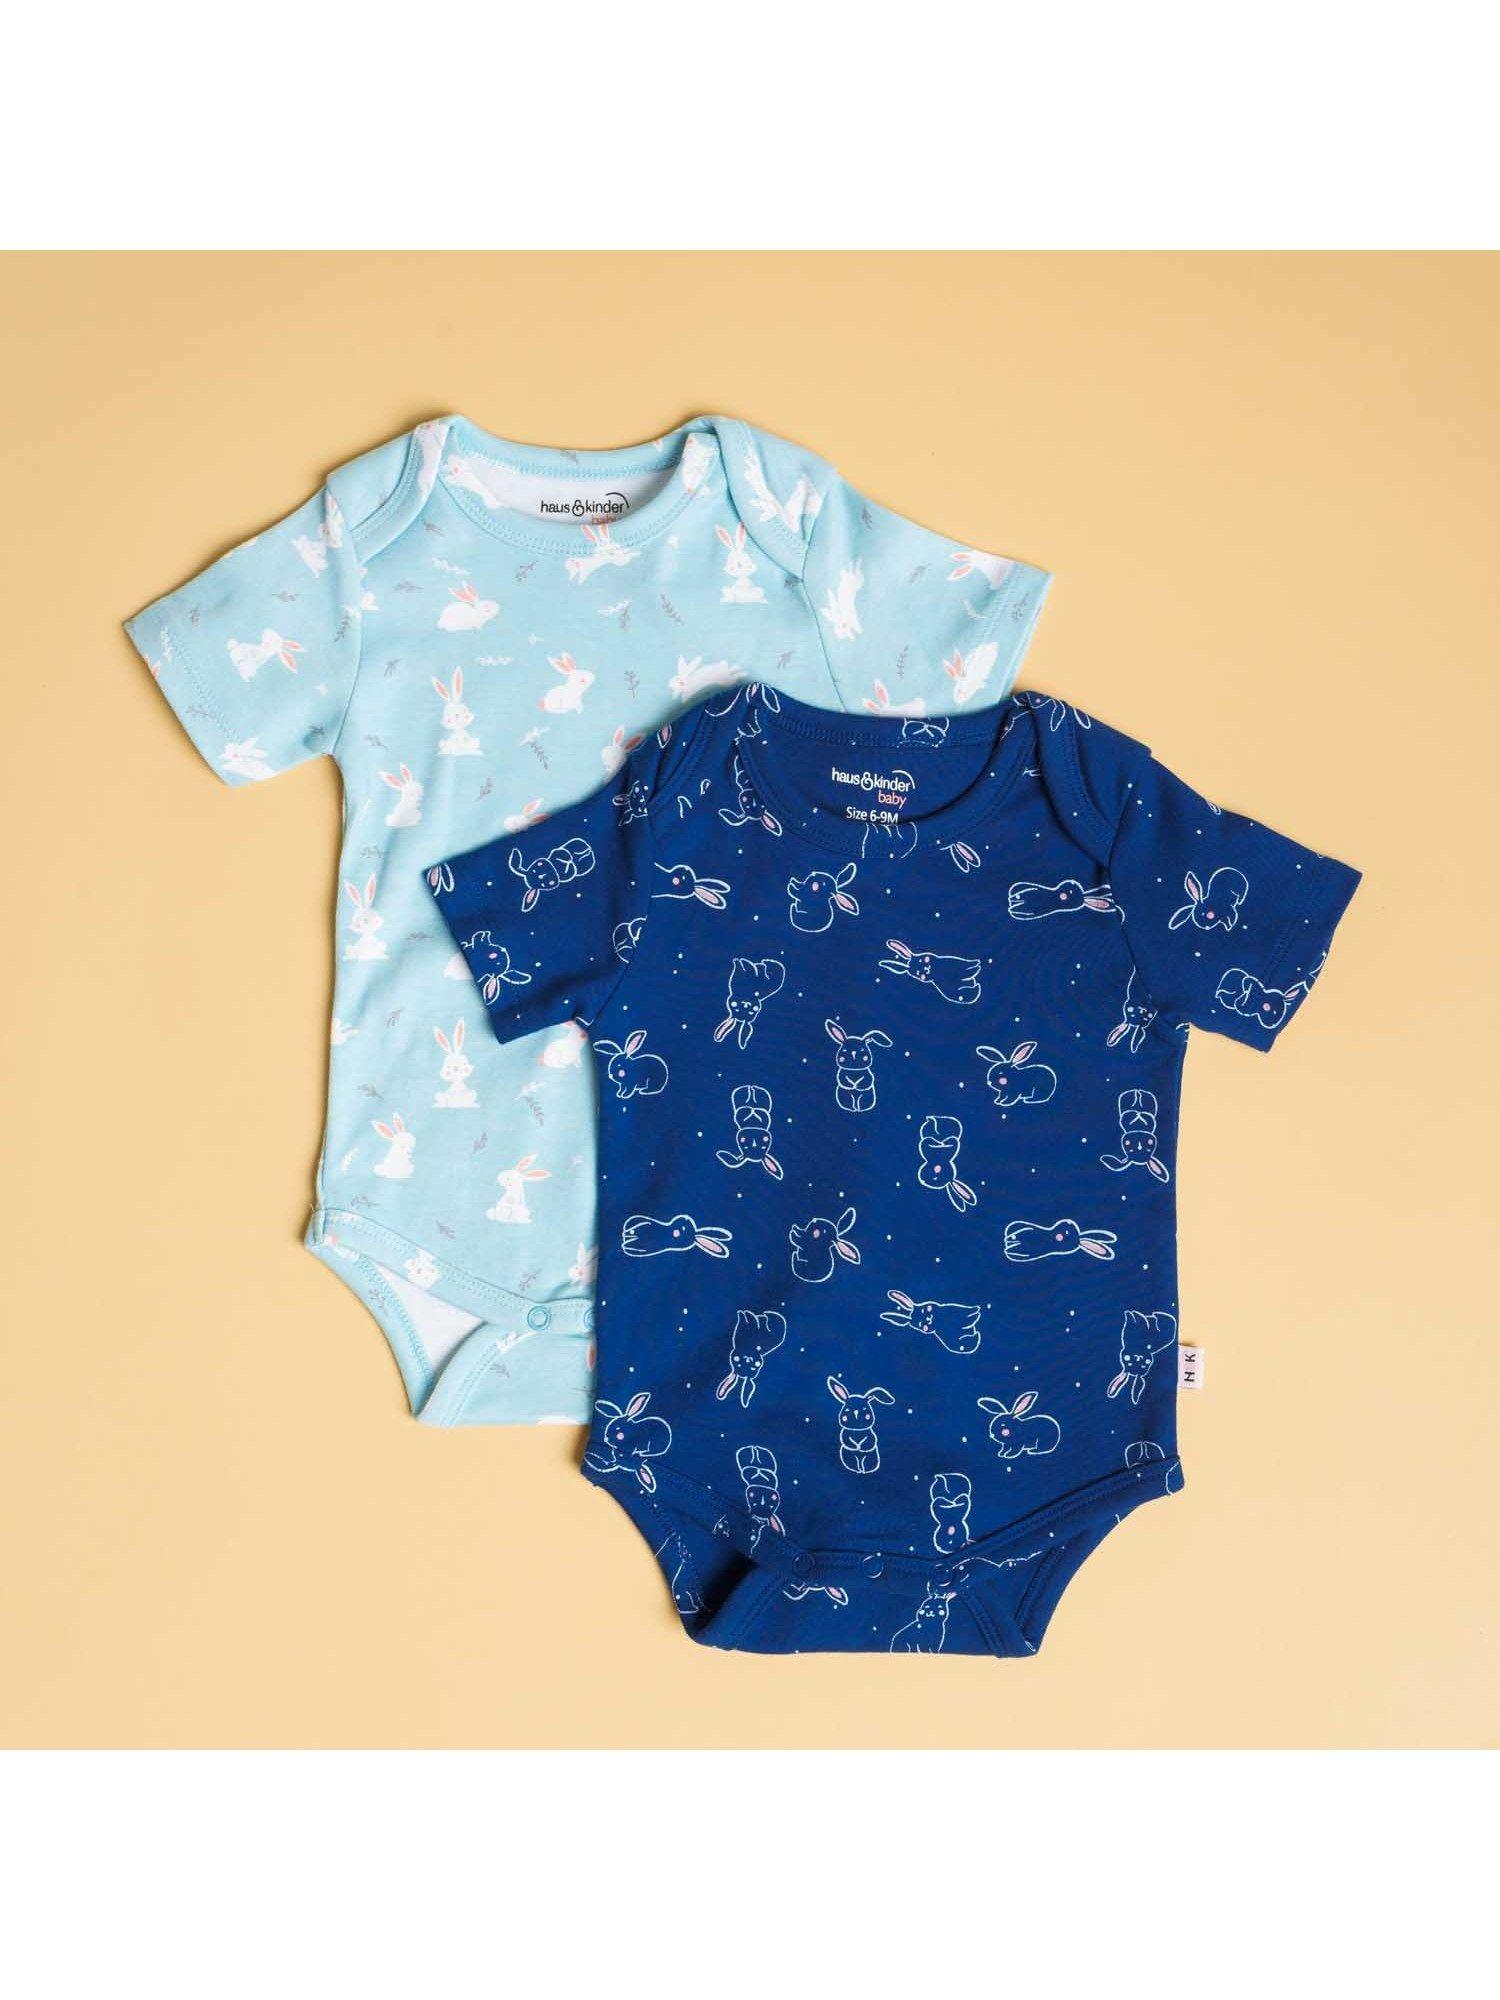 baby boy hippity hop onesies light blue and navy blue (pack of 2)